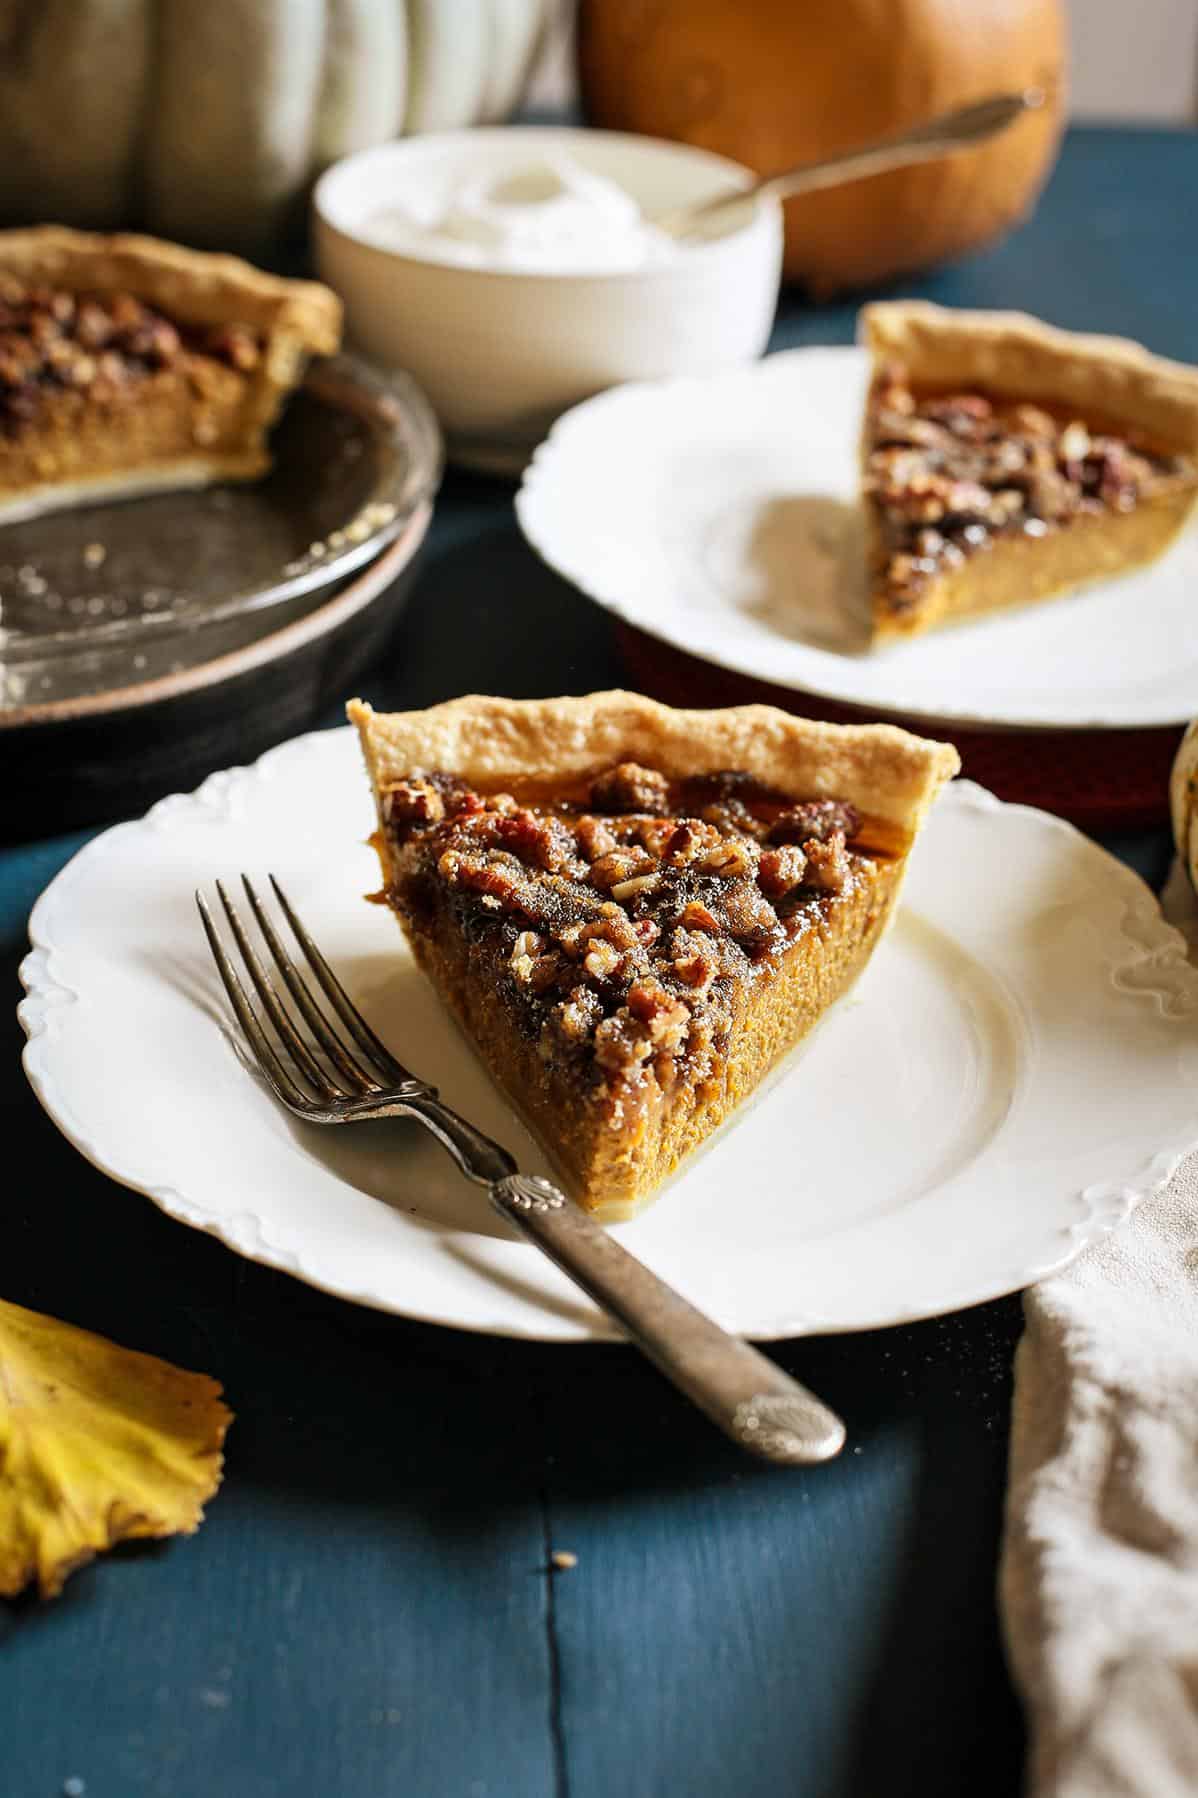  A perfect balance of flavors makes this pumpkin pie irresistible.